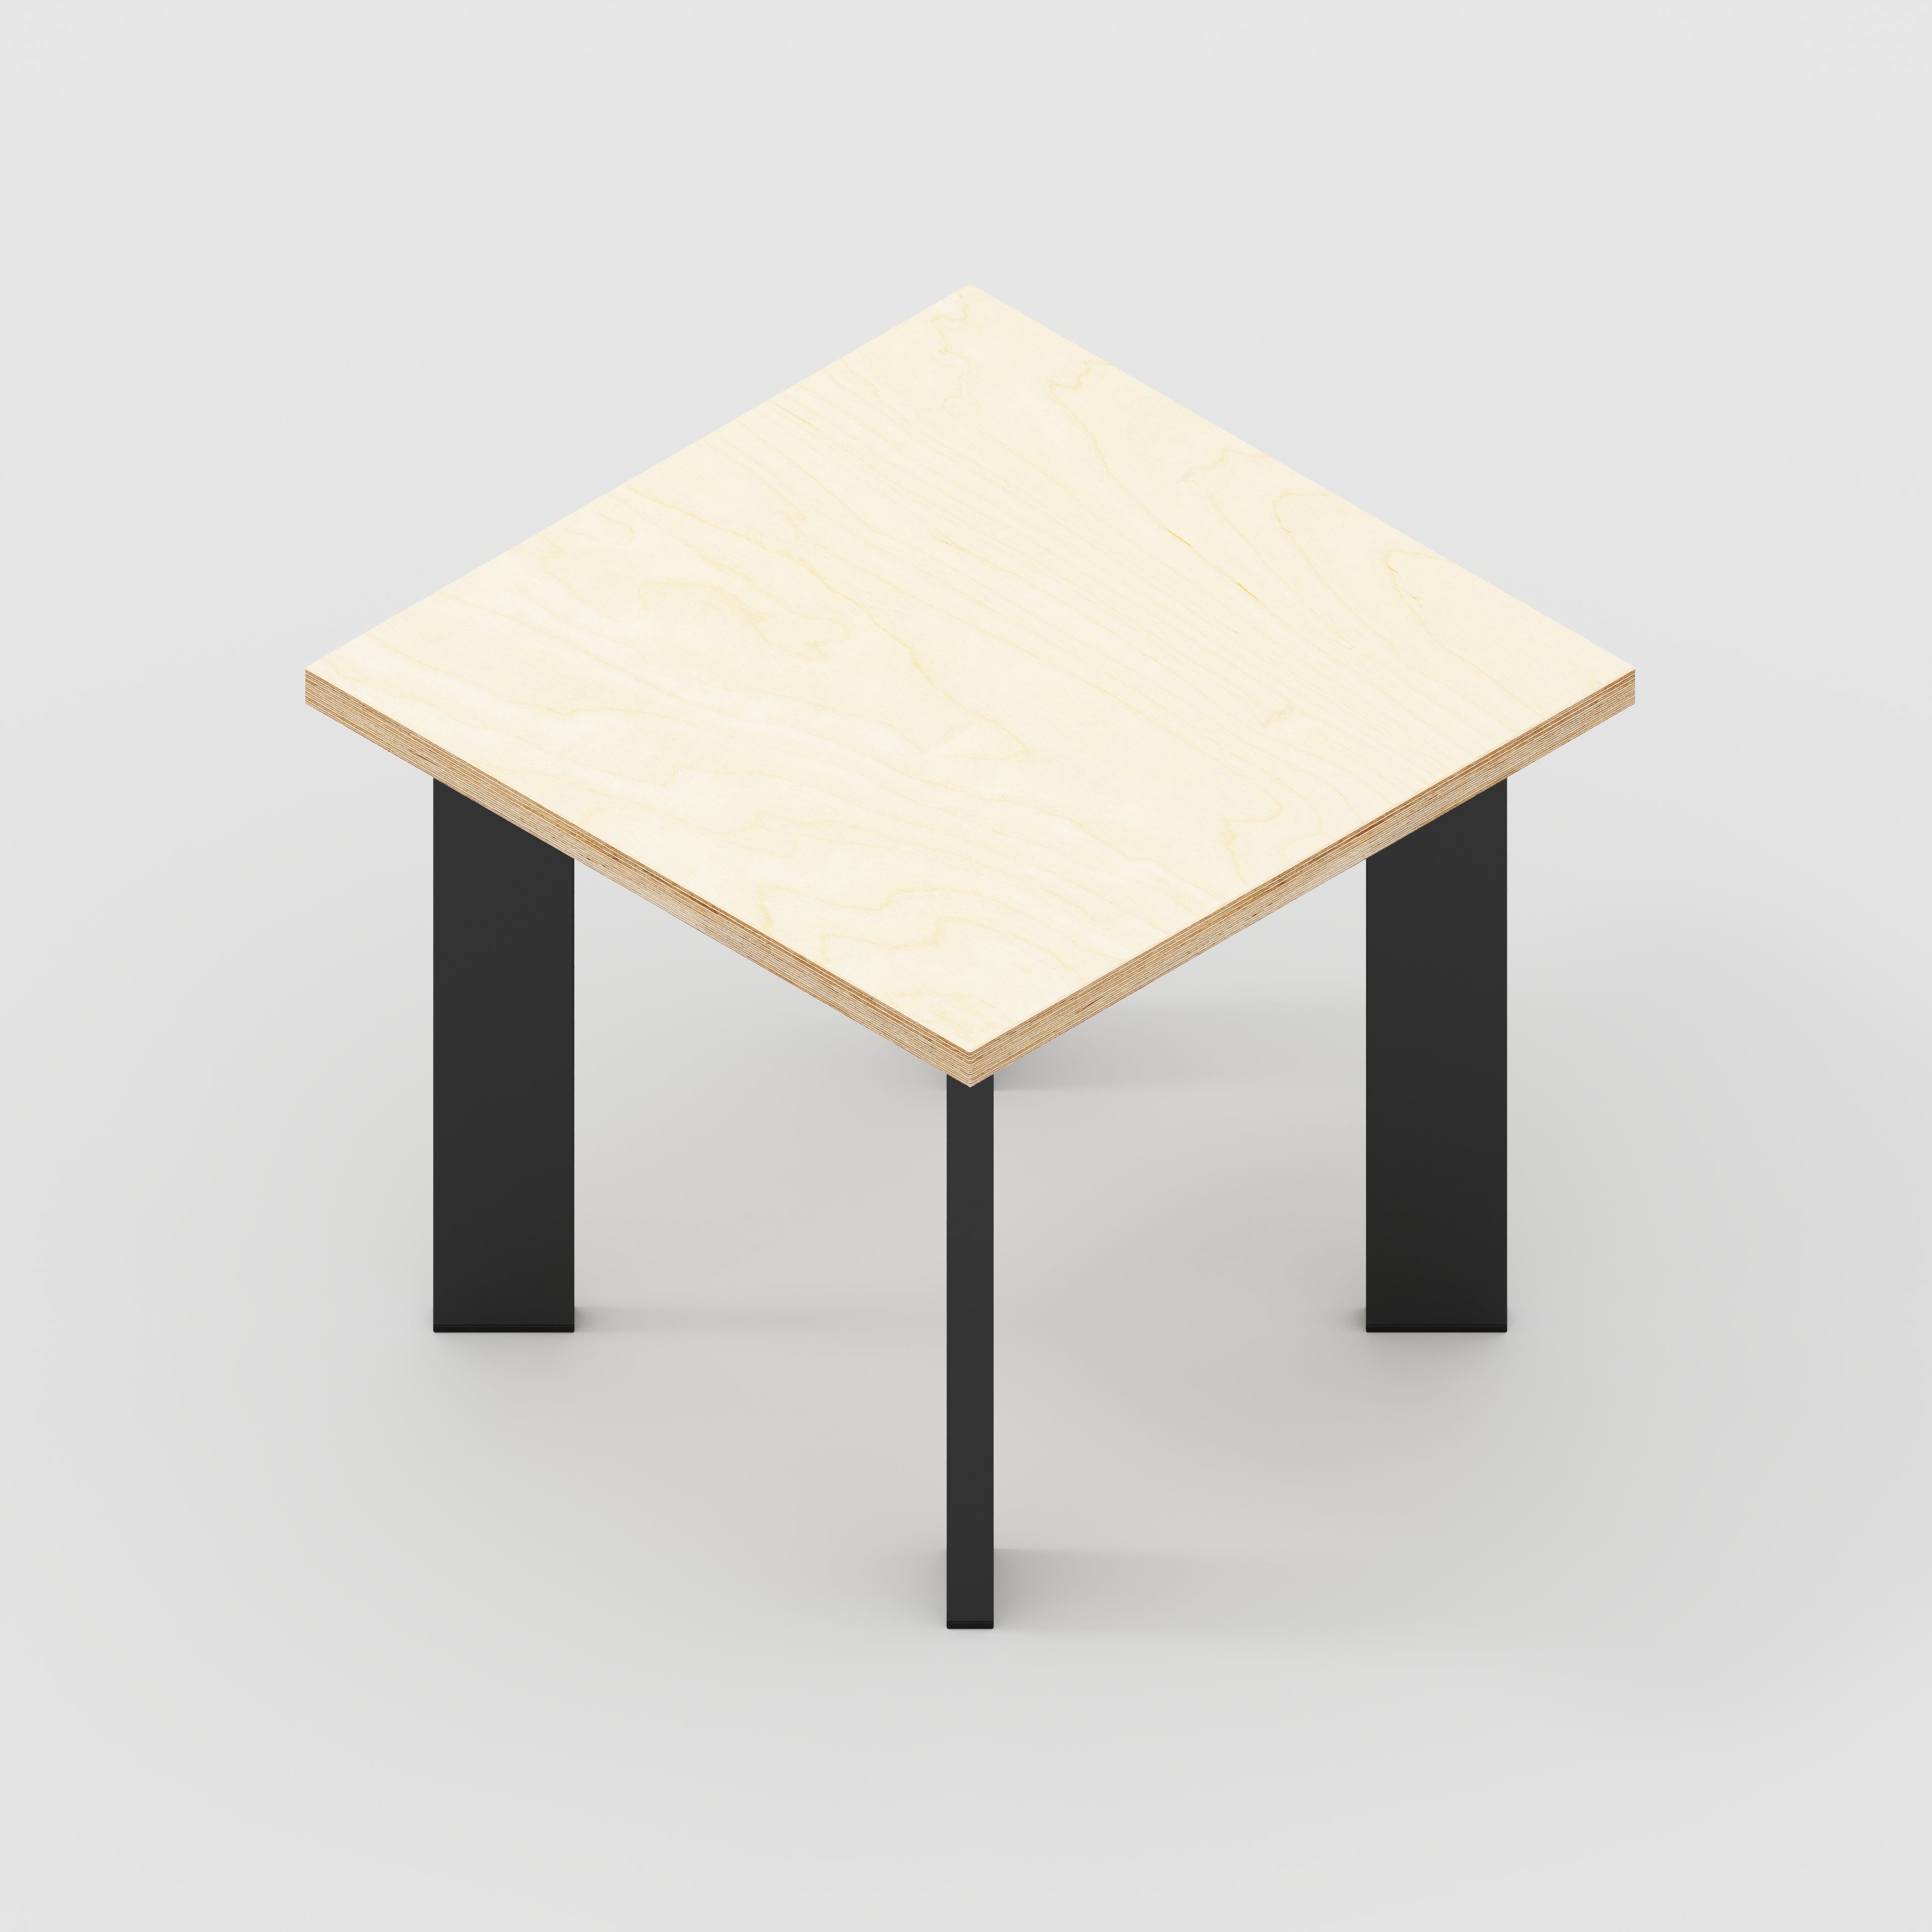 Side Table with Rectangular Single Pin Legs - Plywood Birch - 500(w) x 500(d) x 425(h)